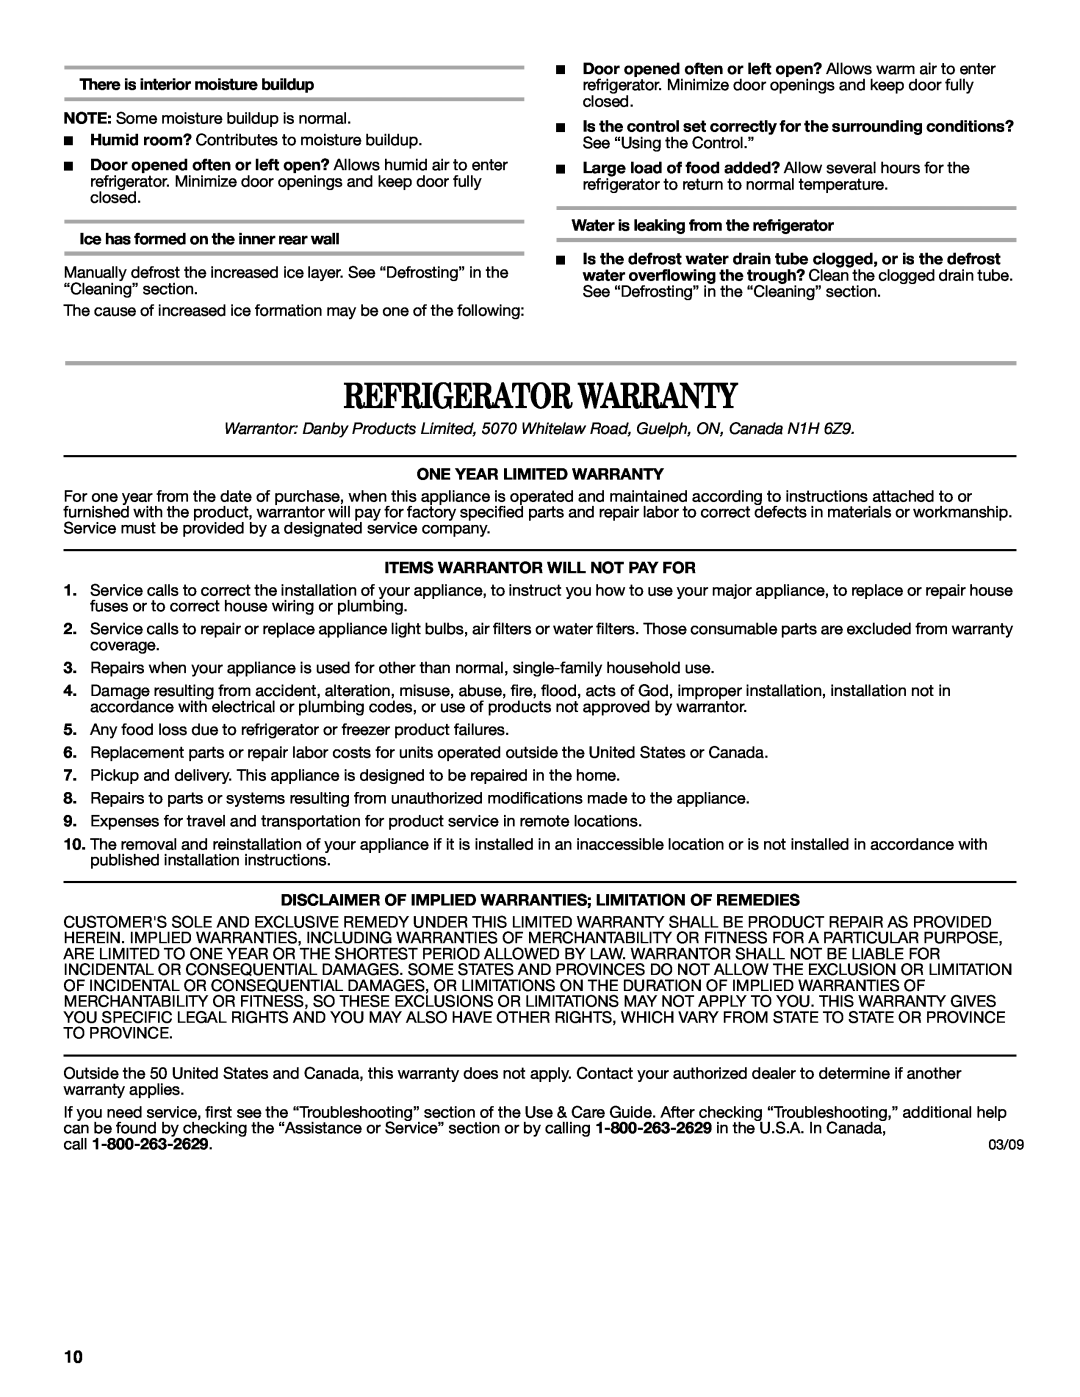 Whirlpool WAR349BSL Refrigerator Warranty, There is interior moisture buildup, Ice has formed on the inner rear wall, call 